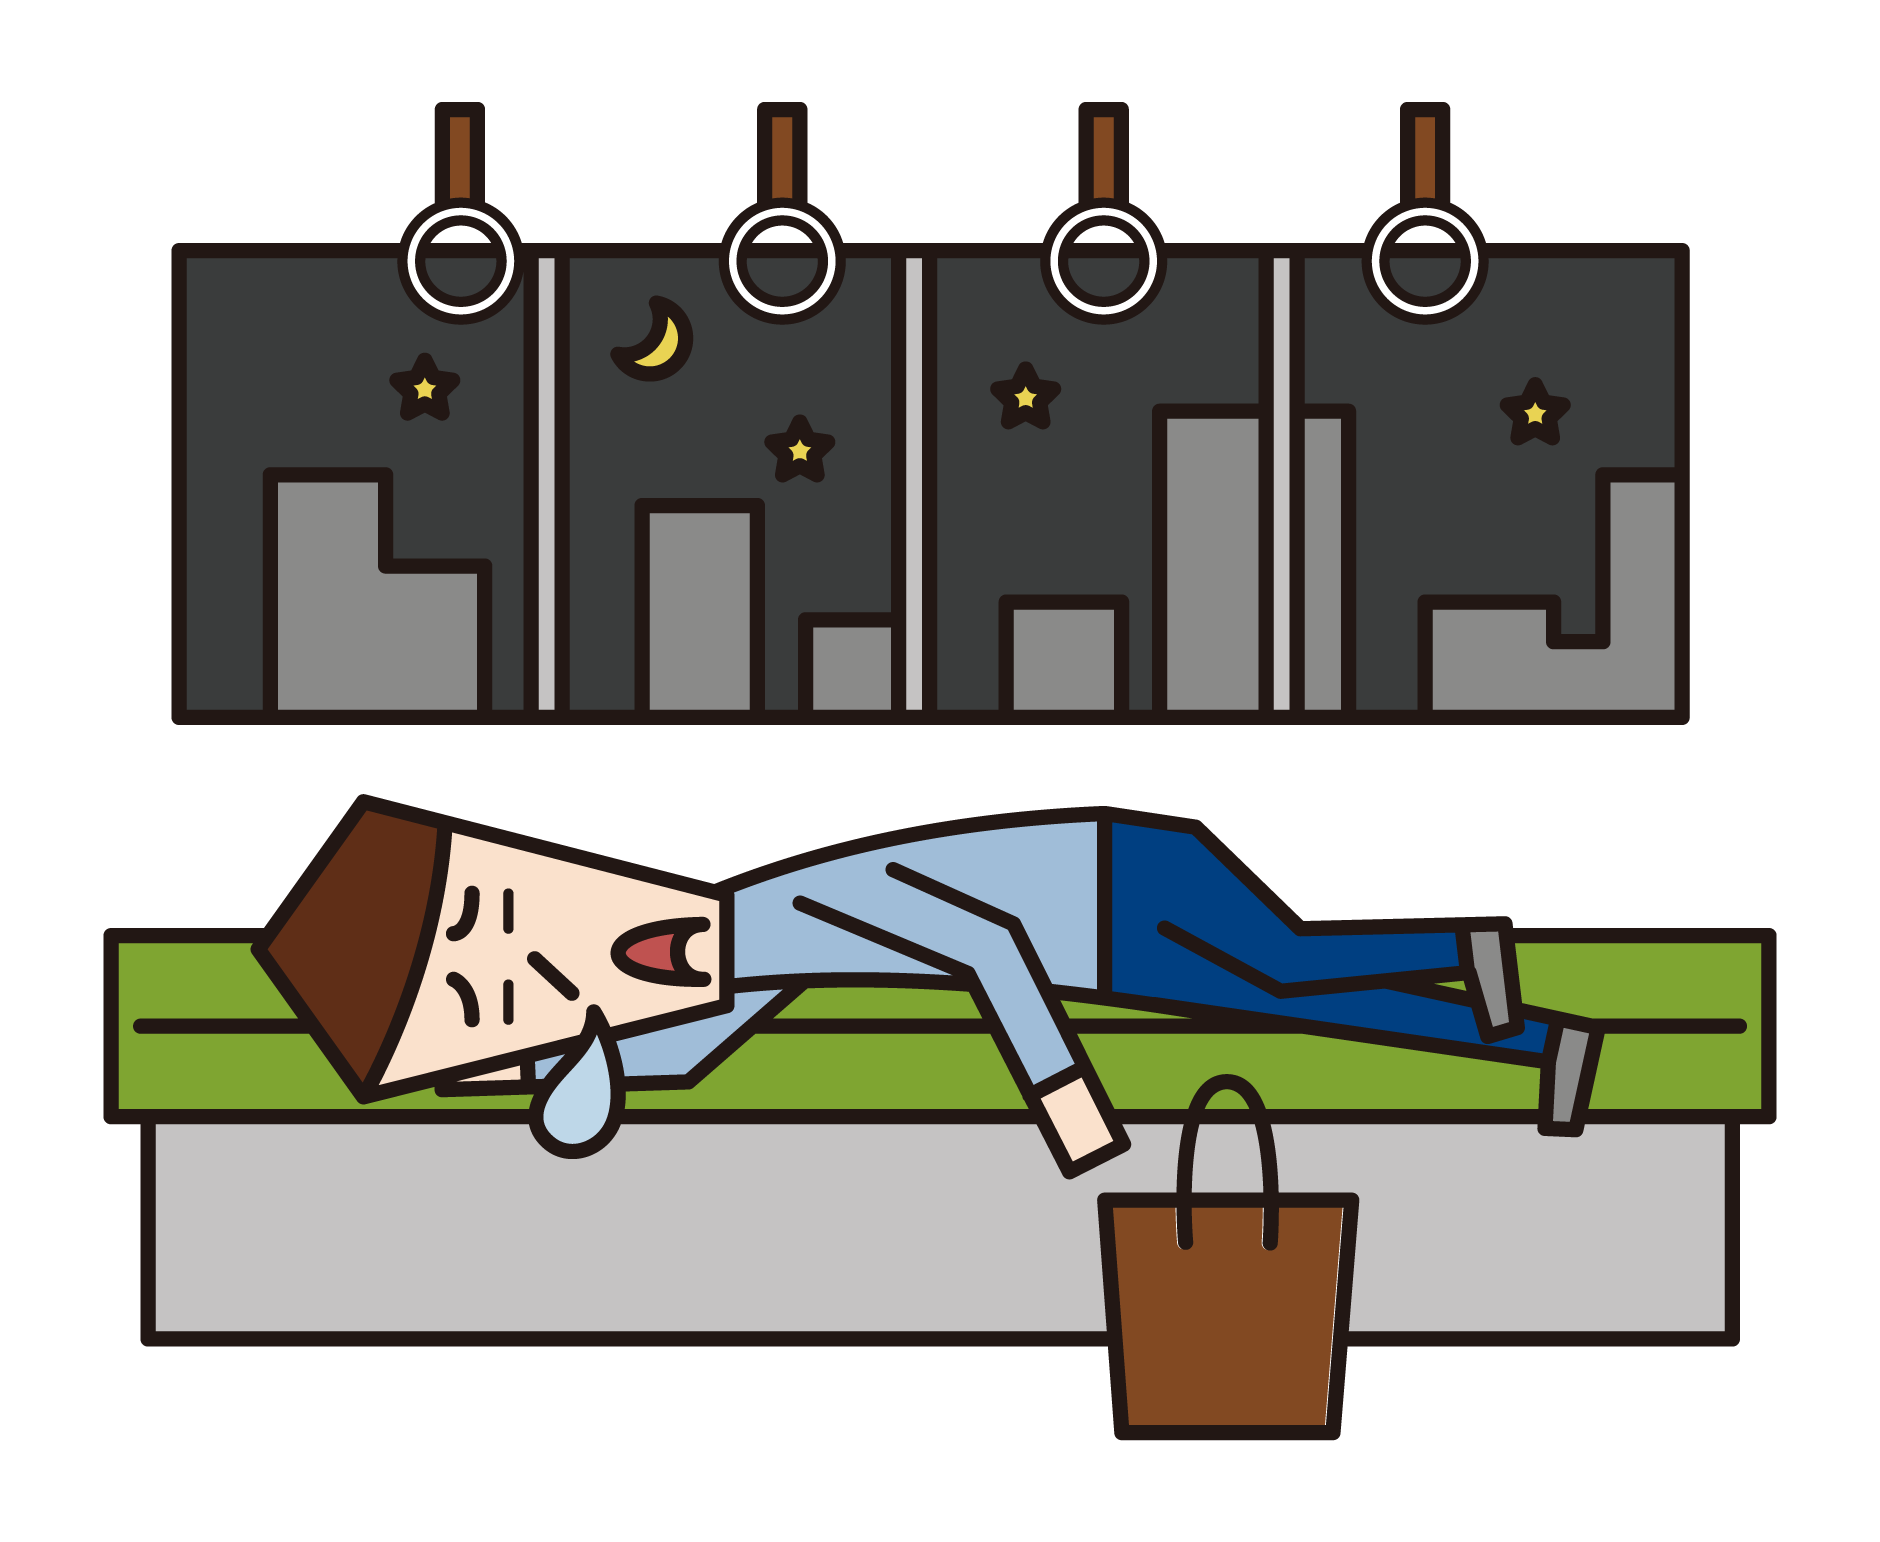 Illustration of a drunk person (man) sleeping on a train